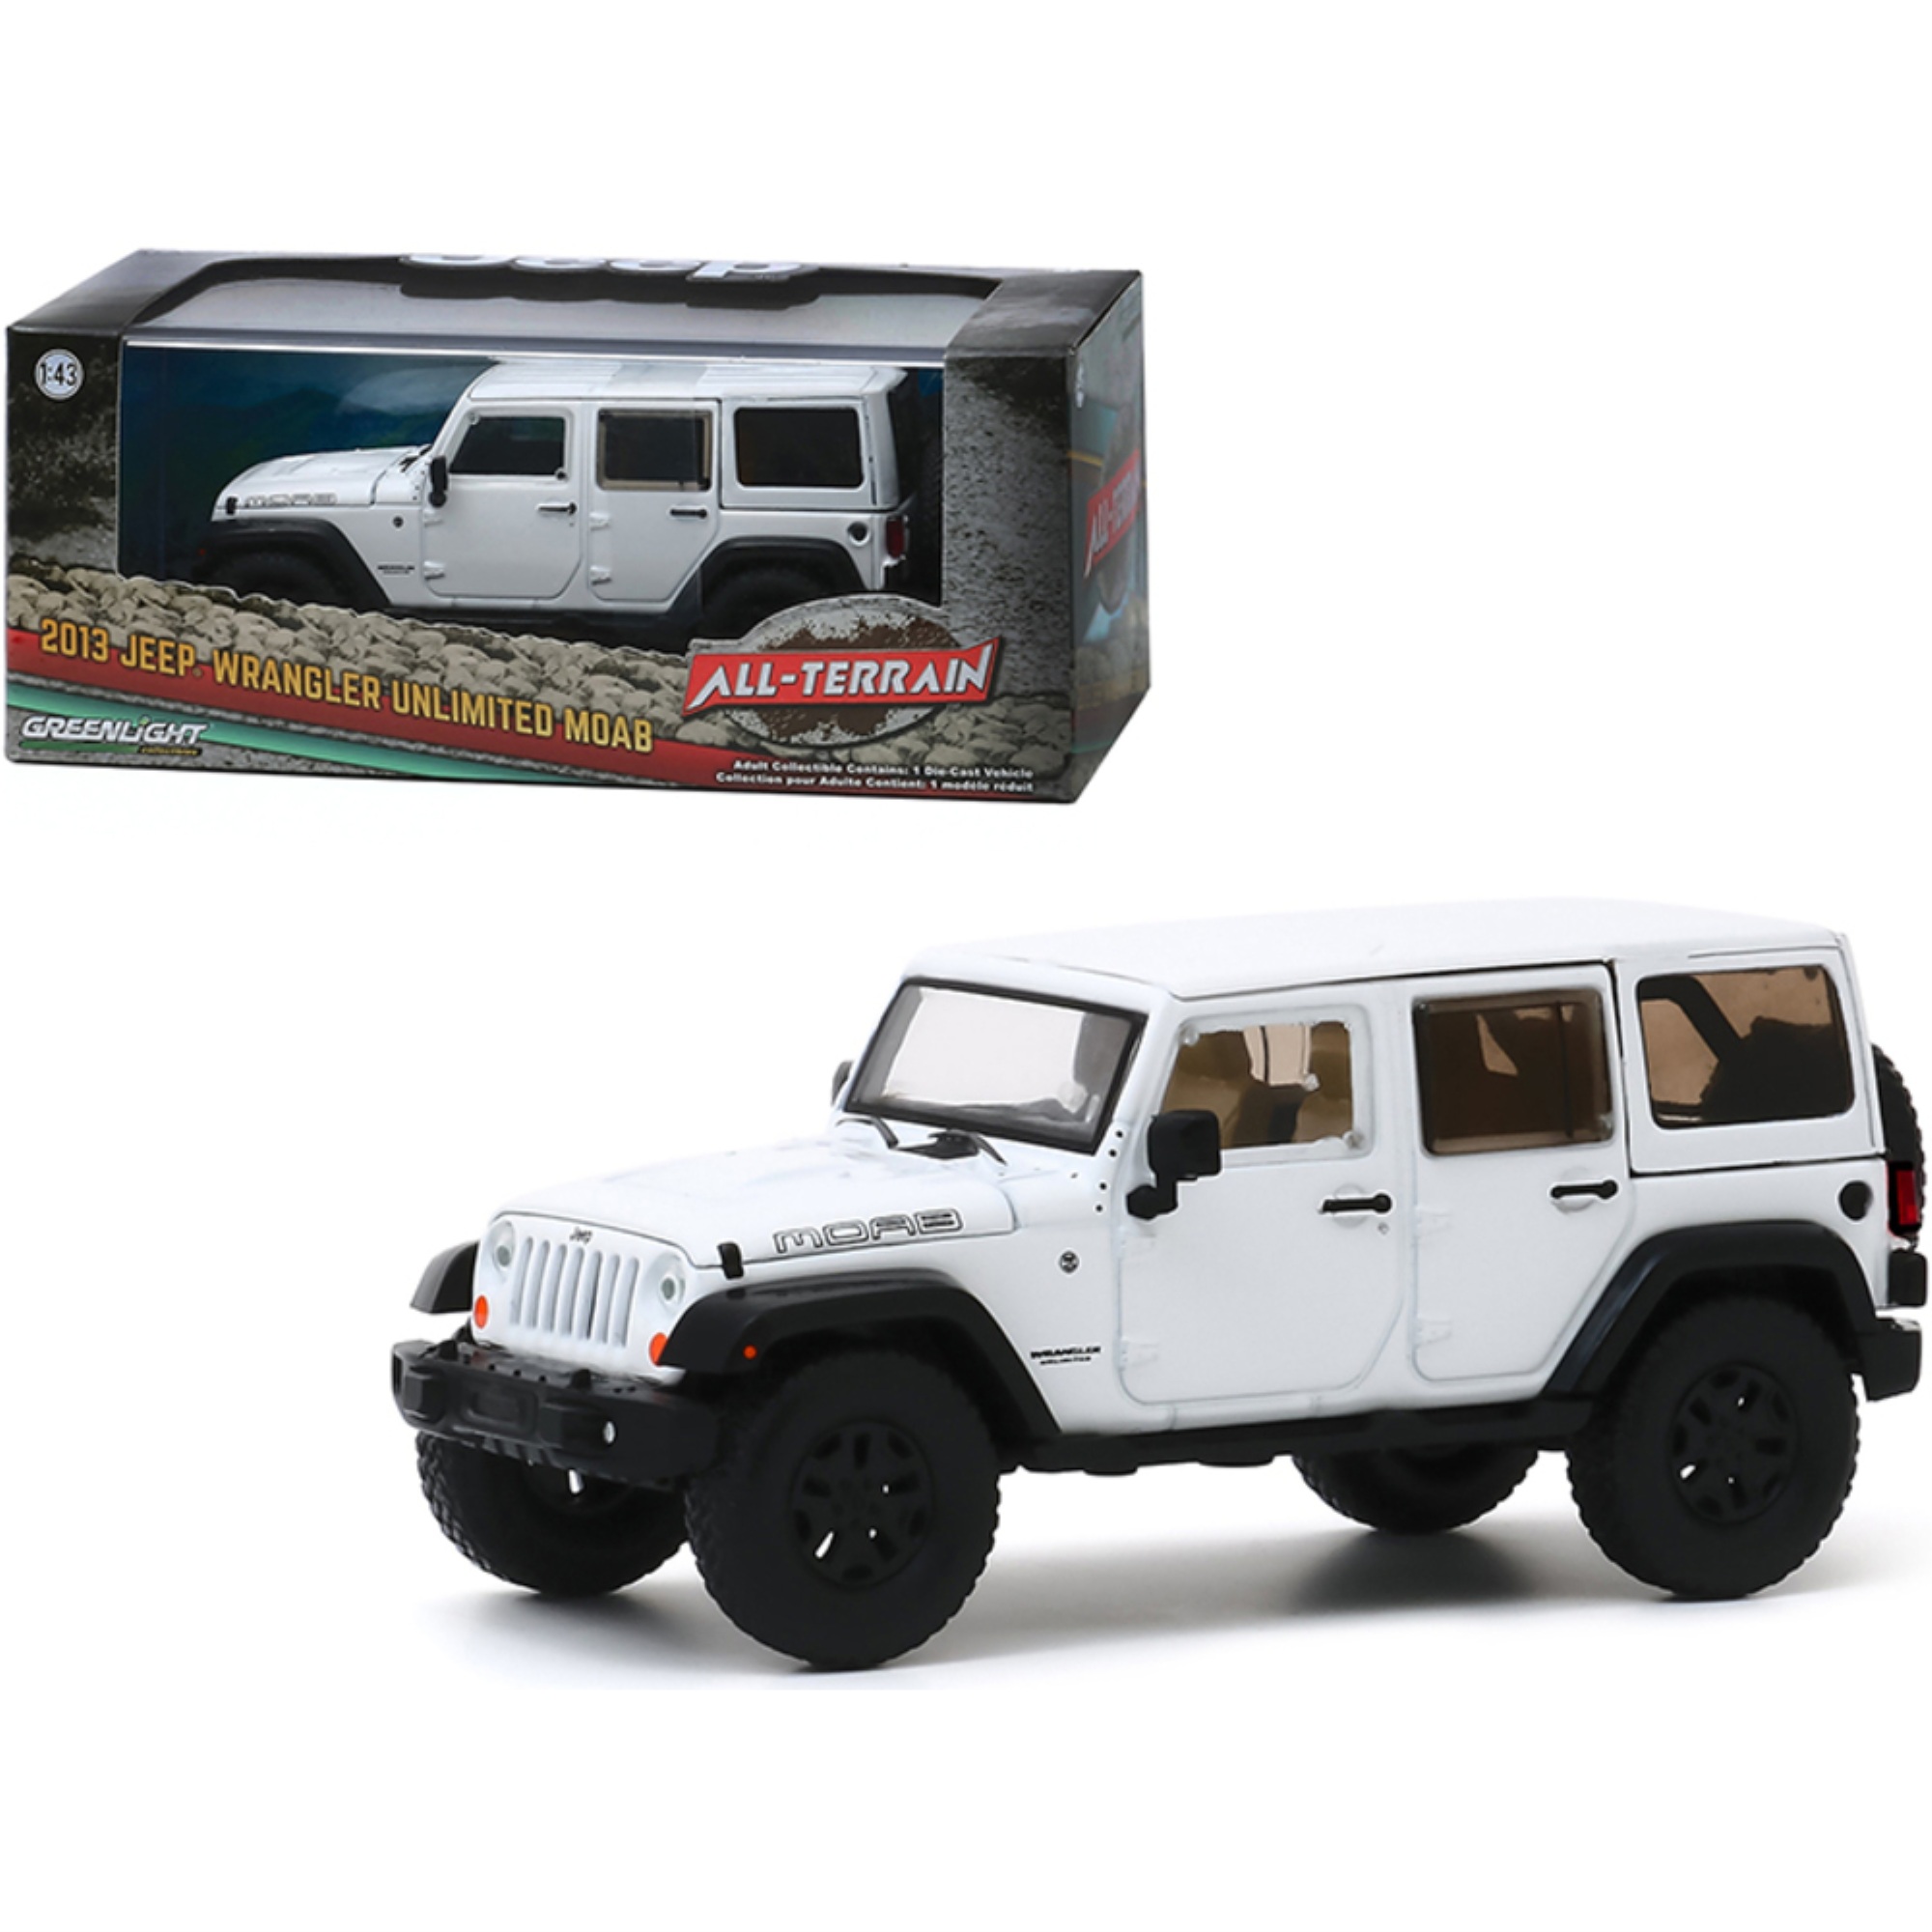 GreenLight DDS-10180 2013 Jeep Wrangler Unlimited Moab Bright White All-Terrain  Series 1/43 Diecast Model Car by Greenlight 86176